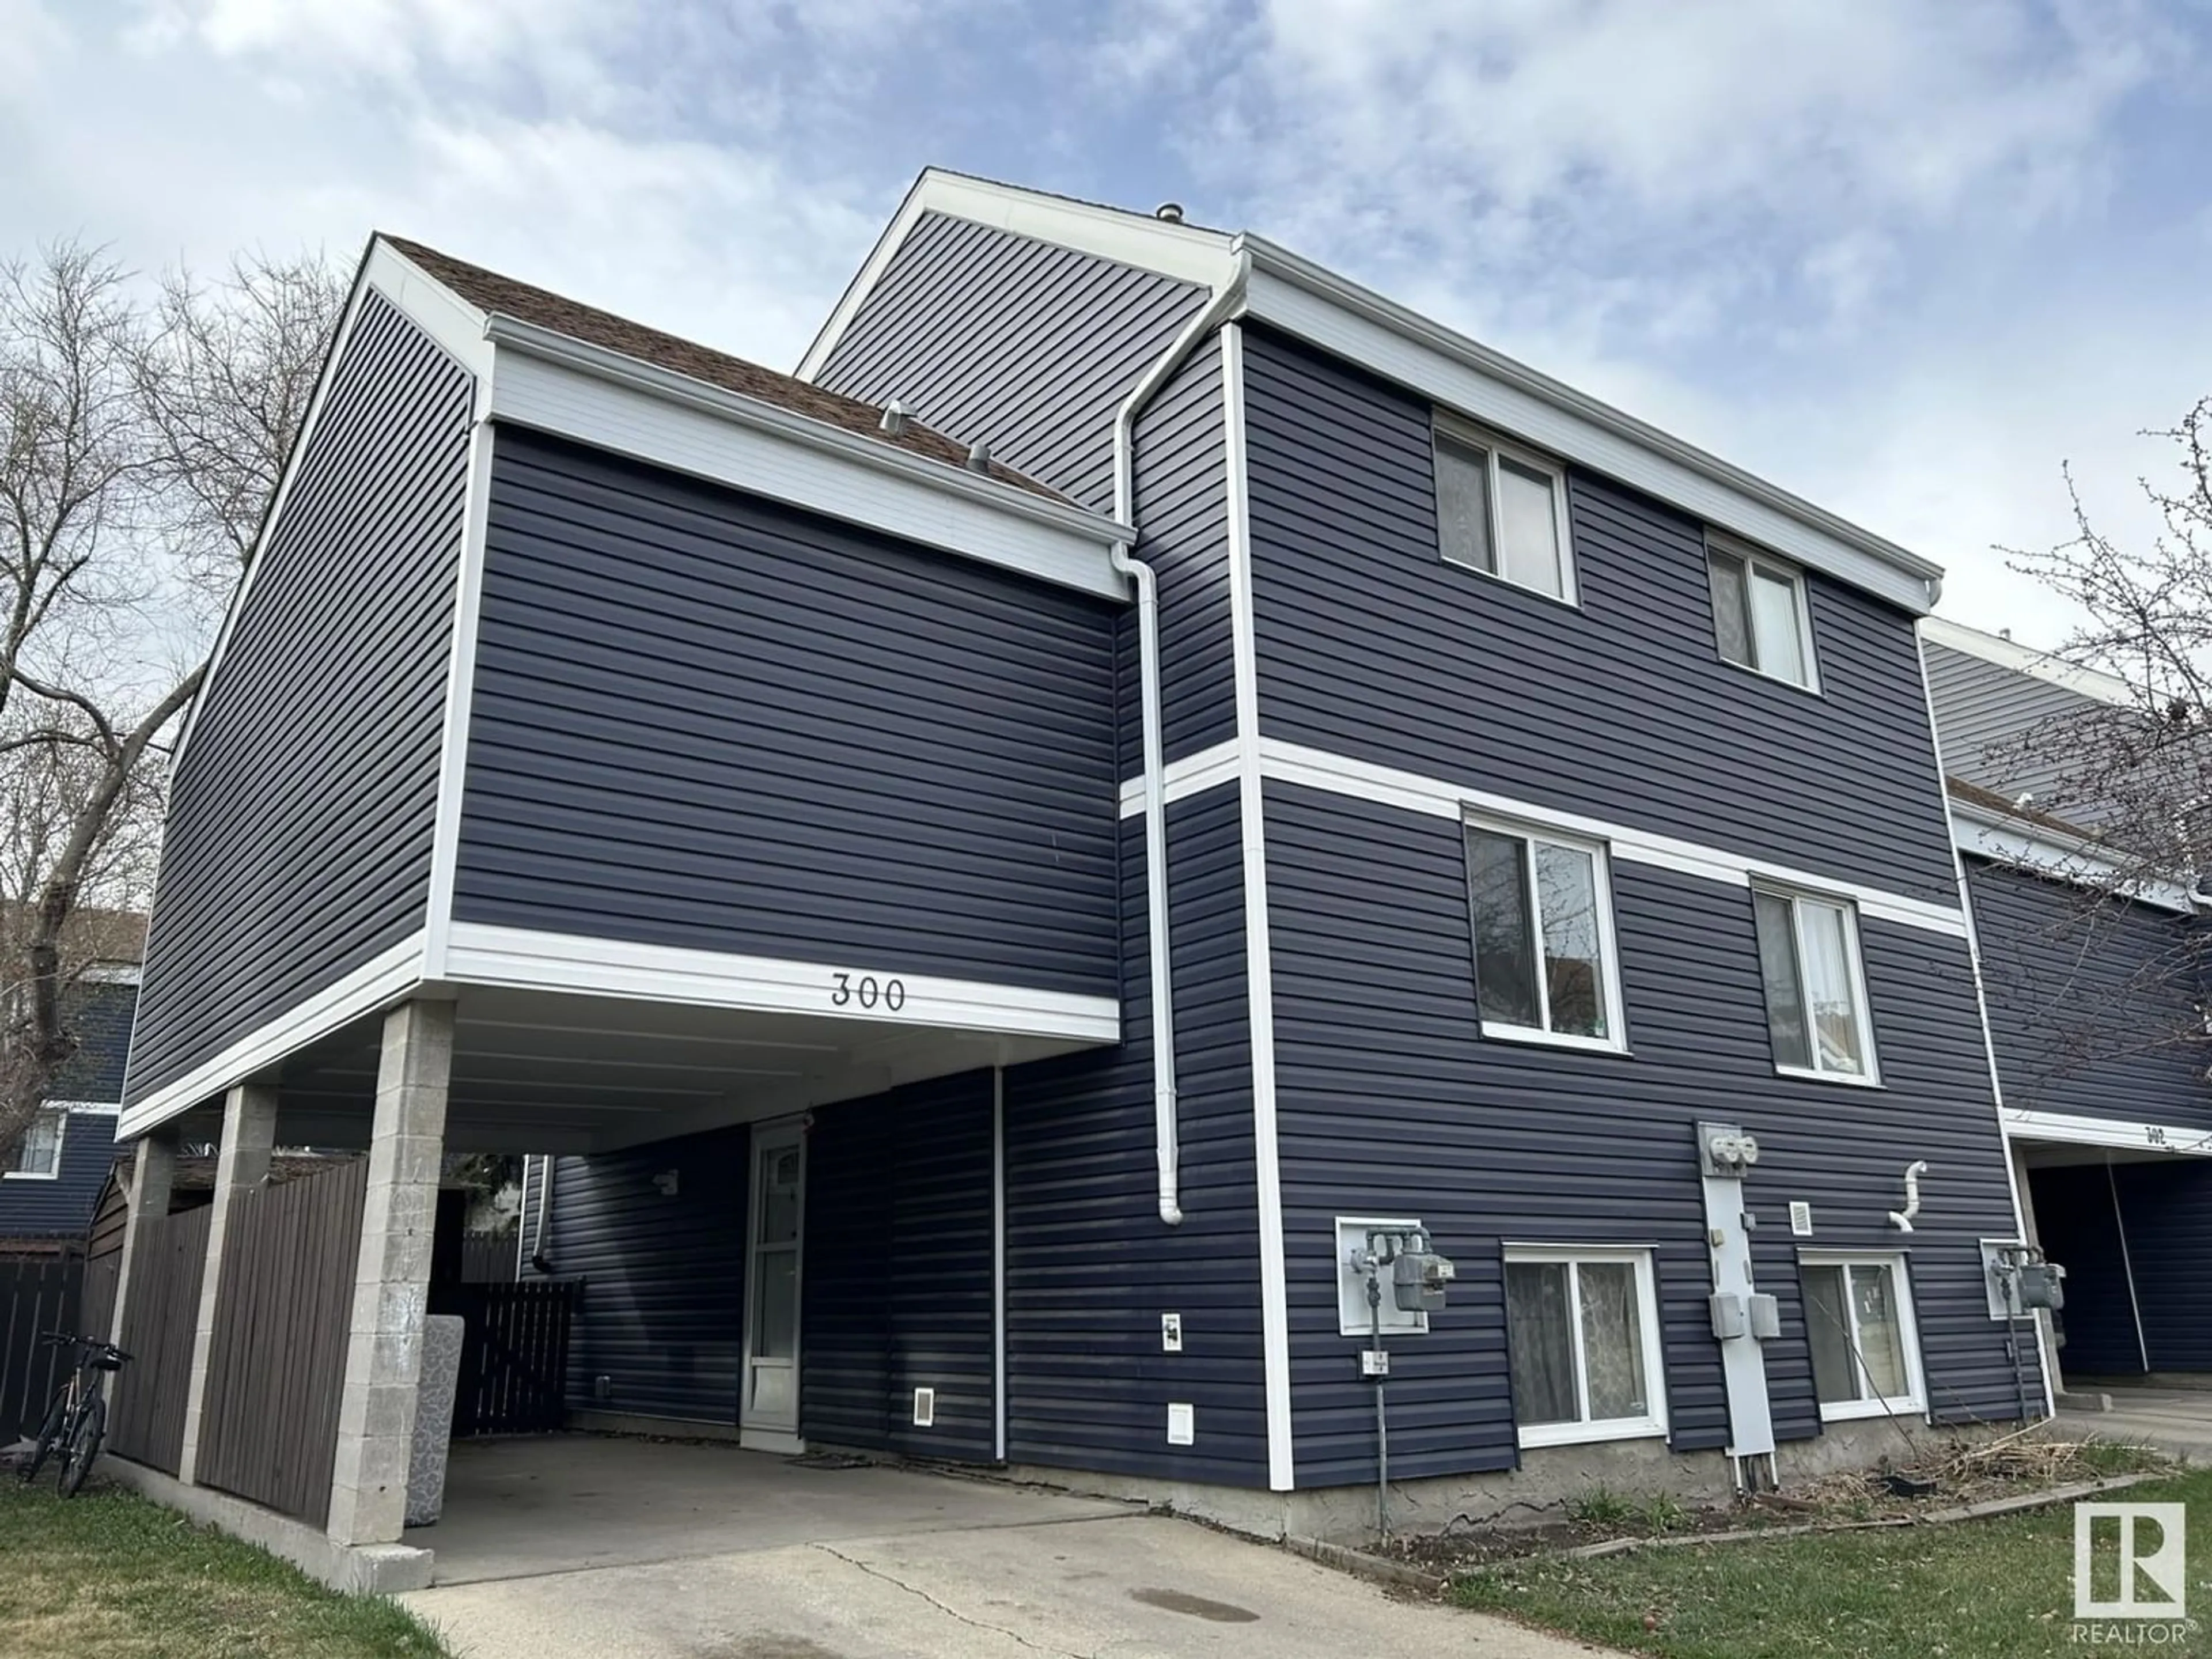 A pic from exterior of the house or condo for 300 MORIN MZ NW, Edmonton Alberta T6K1V1